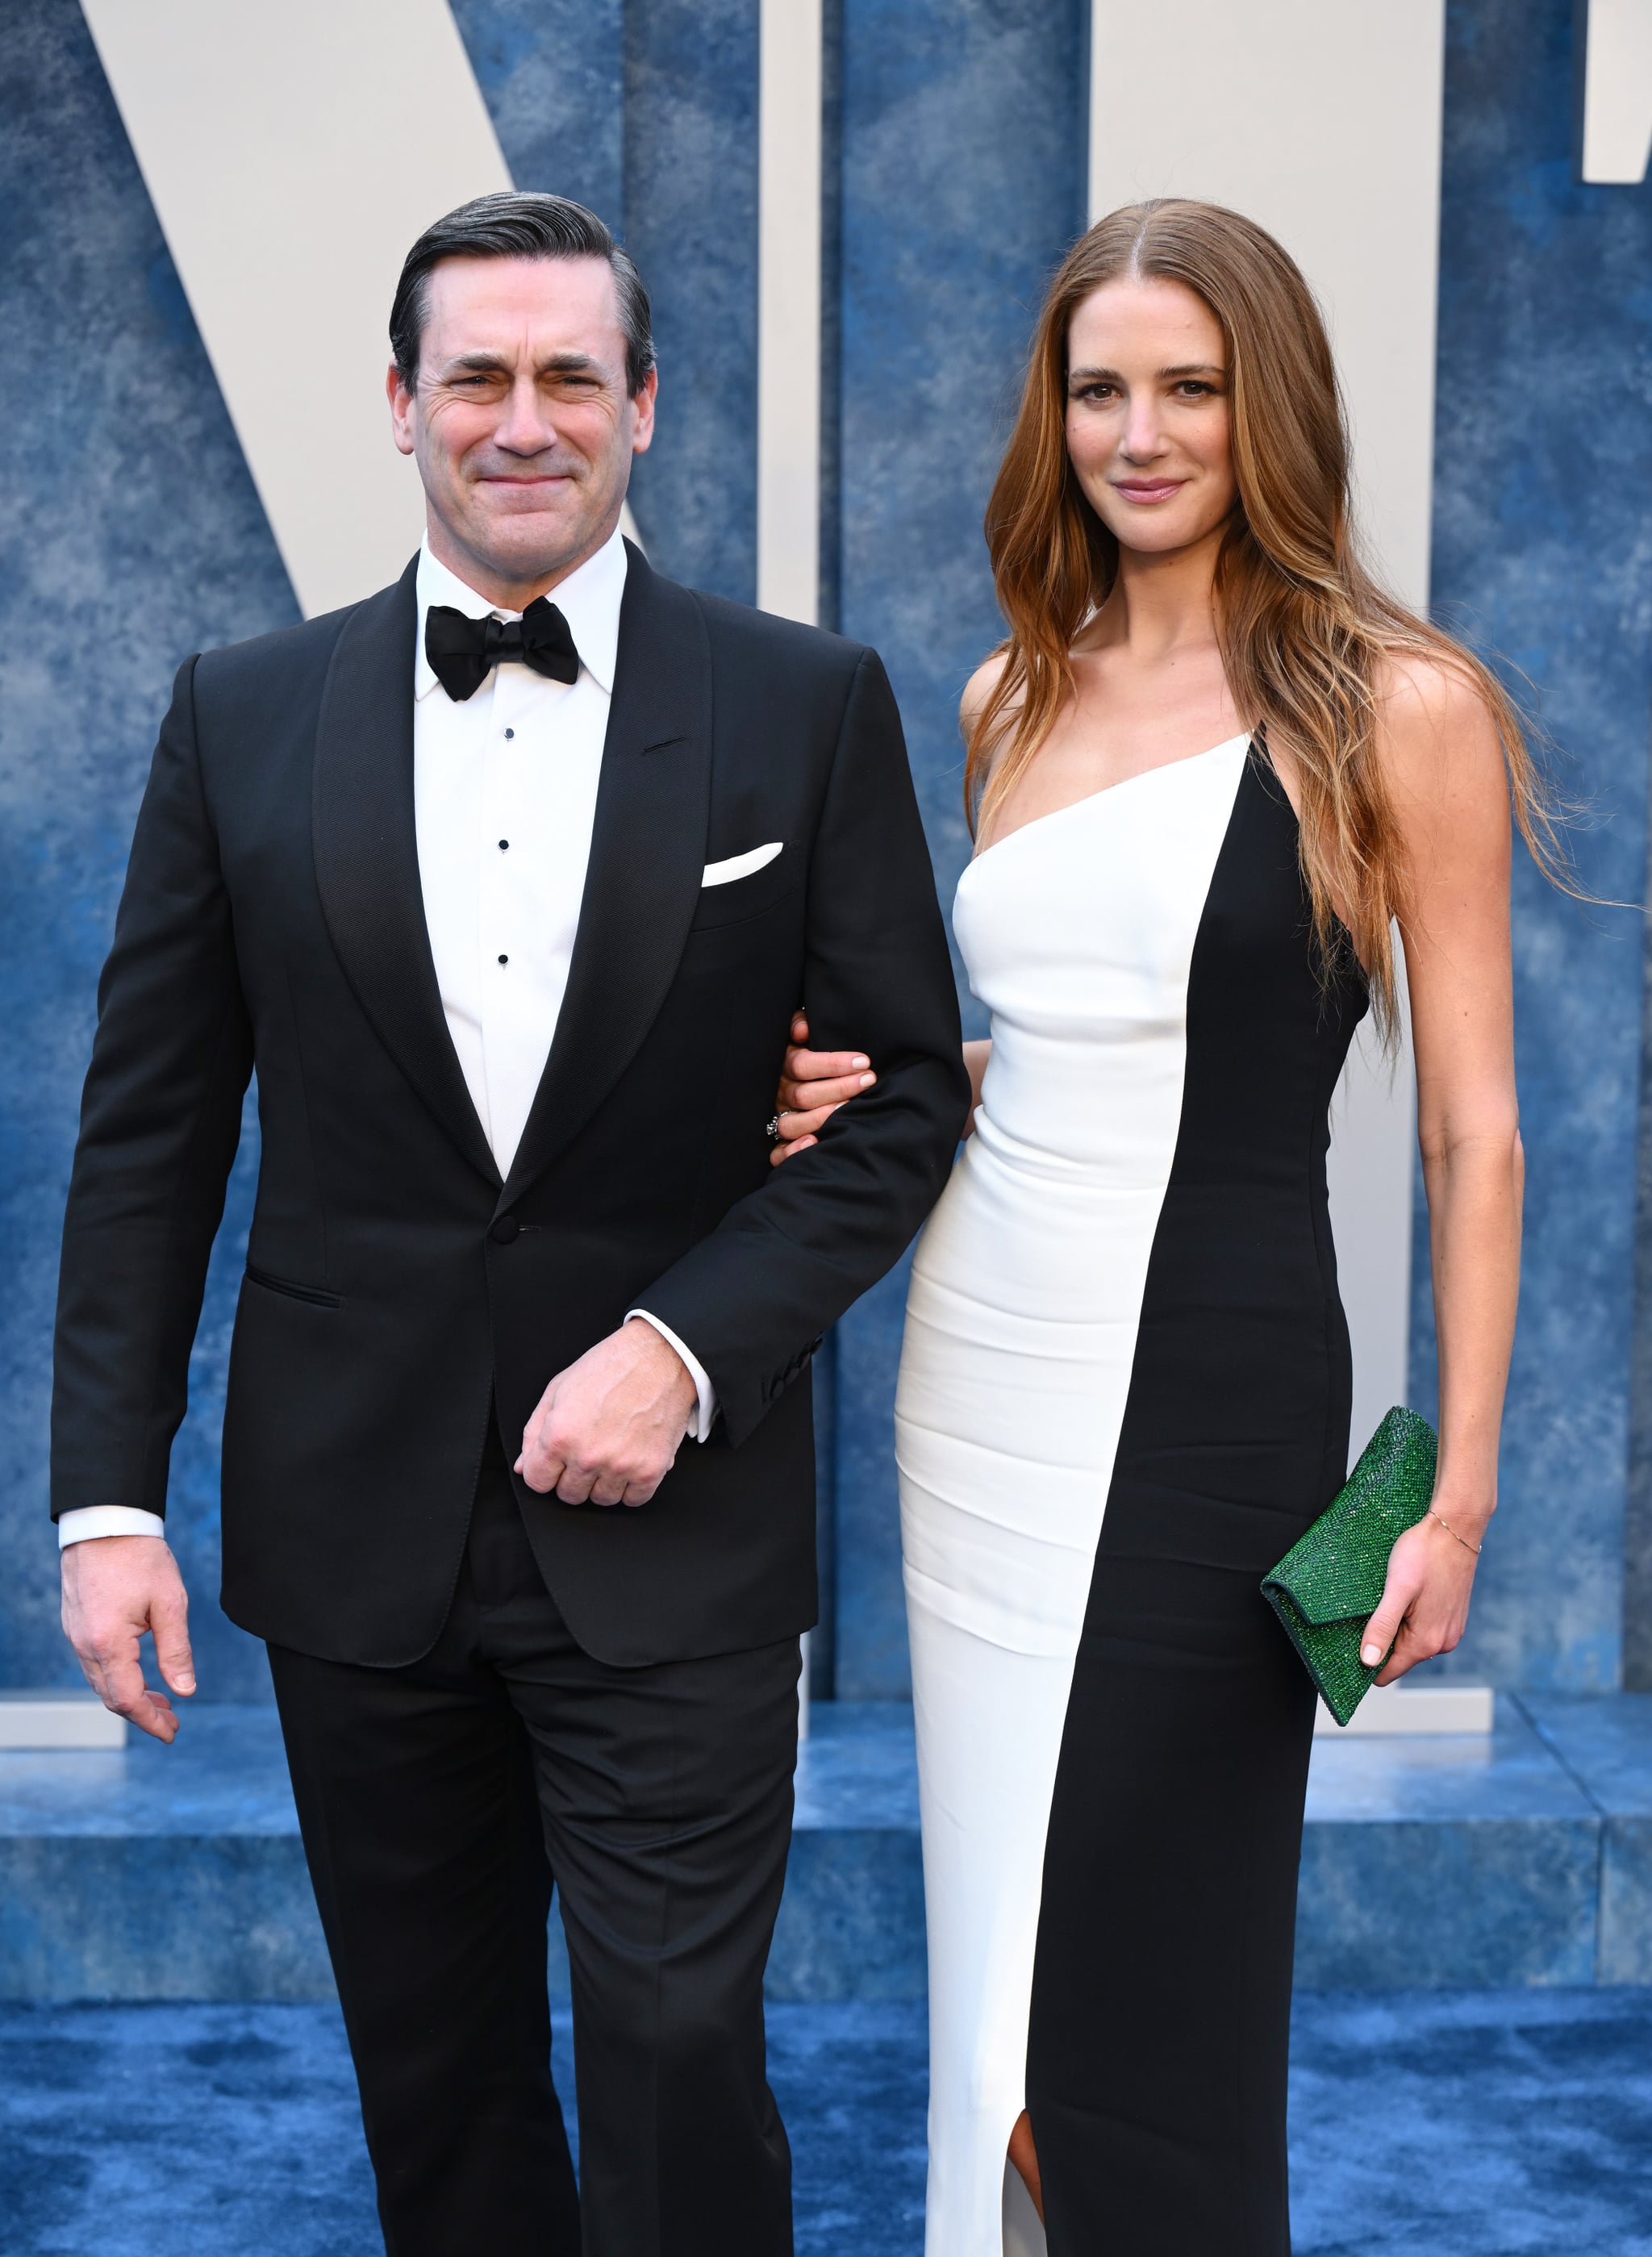 BEVERLY HILLS, CALIFORNIA - MARCH 12: (L-R) Jon Hamm and Anna Osceola attend the 2023 Vanity Fair Oscar Party hosted by Radhika Jones at Wallis Annenberg Centre for the Performing Arts on March 12, 2023 in Beverly Hills, California.  (Photo by Karwai Tang/WireImage)